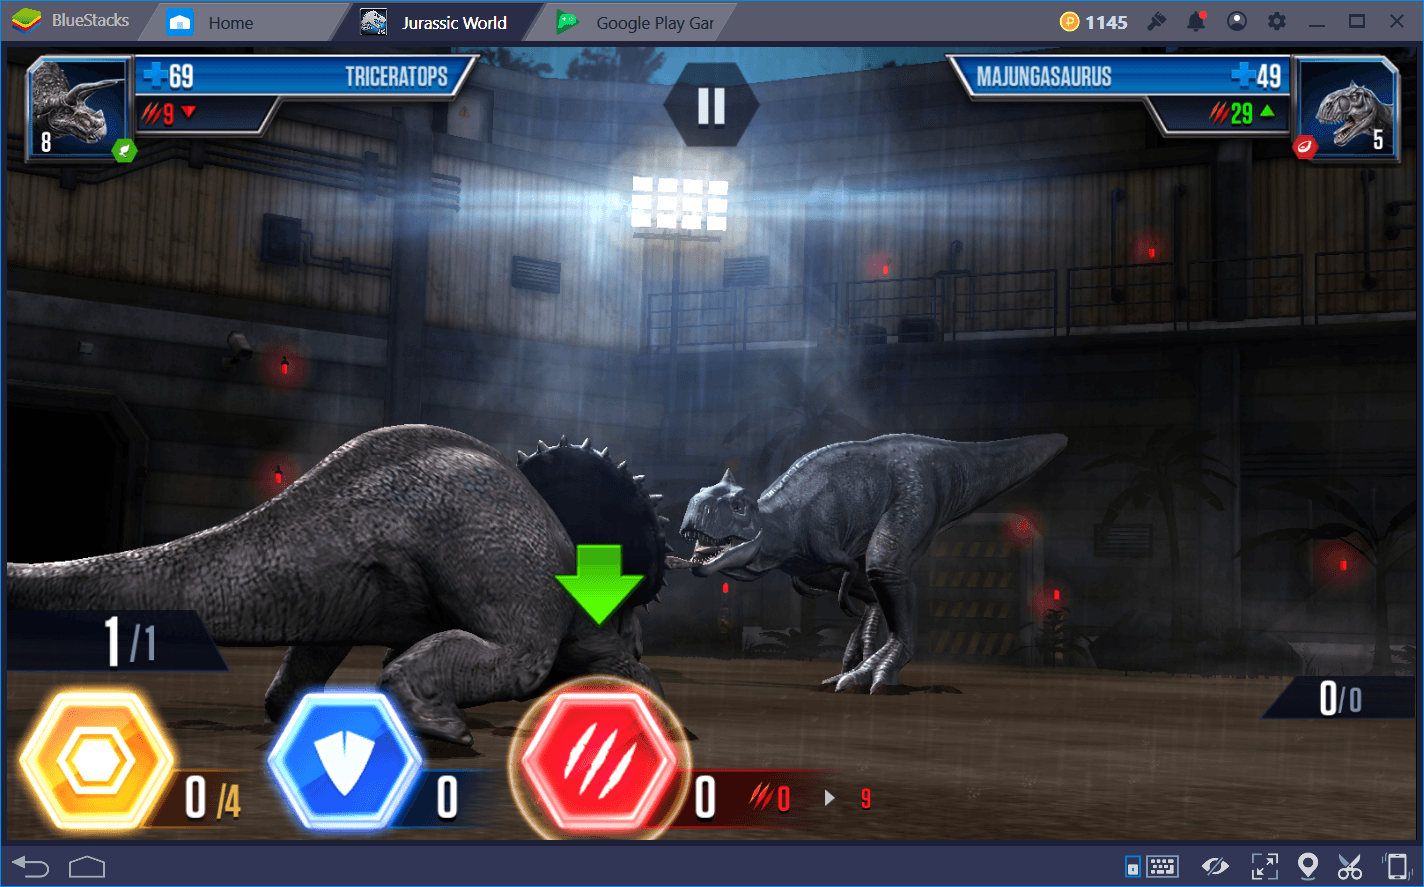 5 Reasons Why You Should Play Jurassic World: The Game